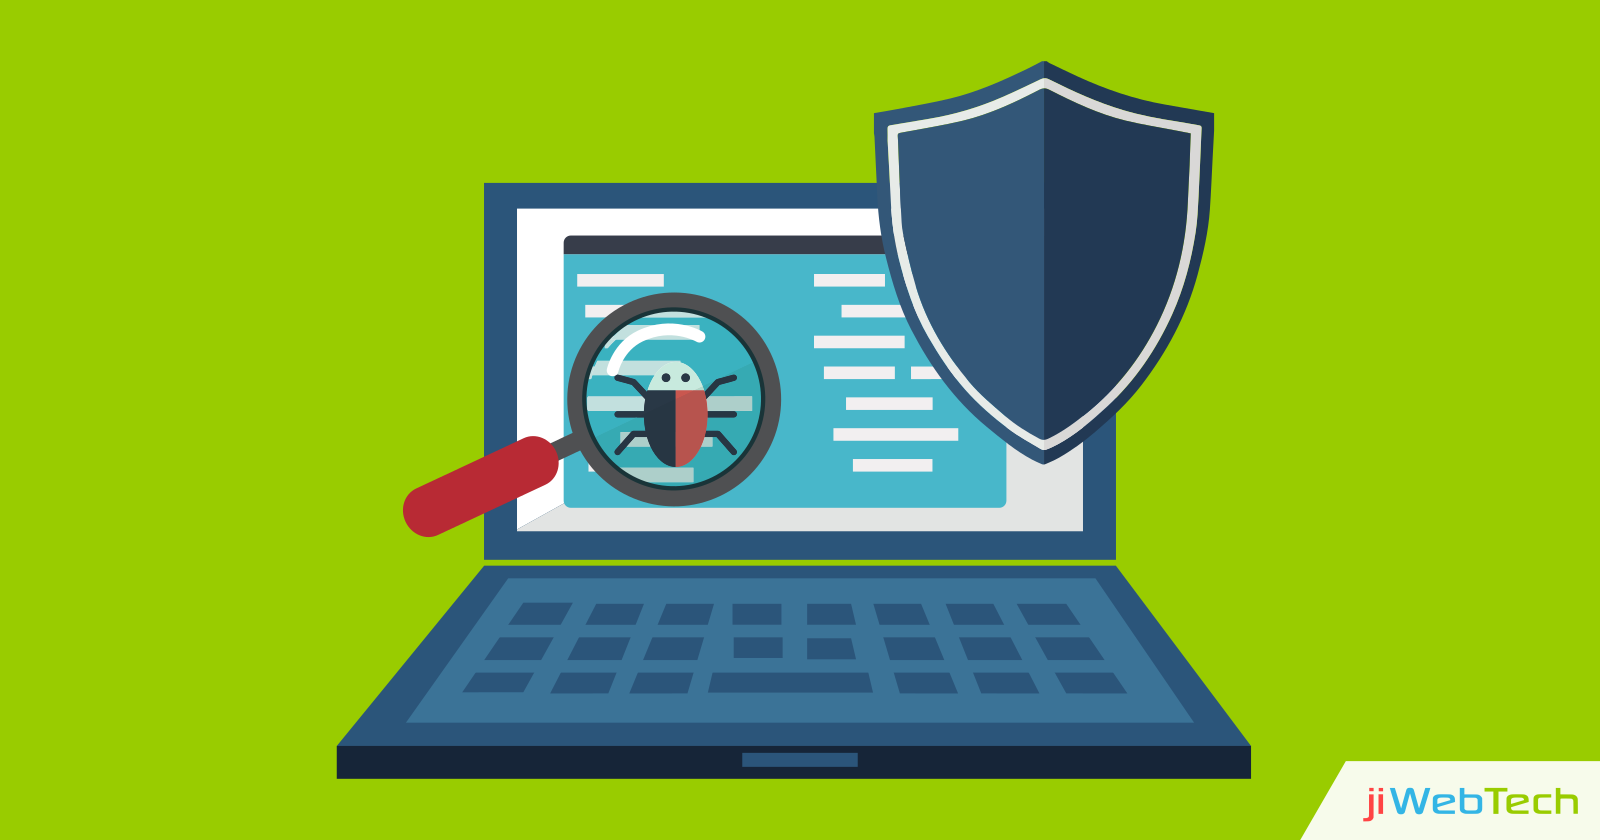 Things You Need to Know About Malware to Keep Your Website Safe